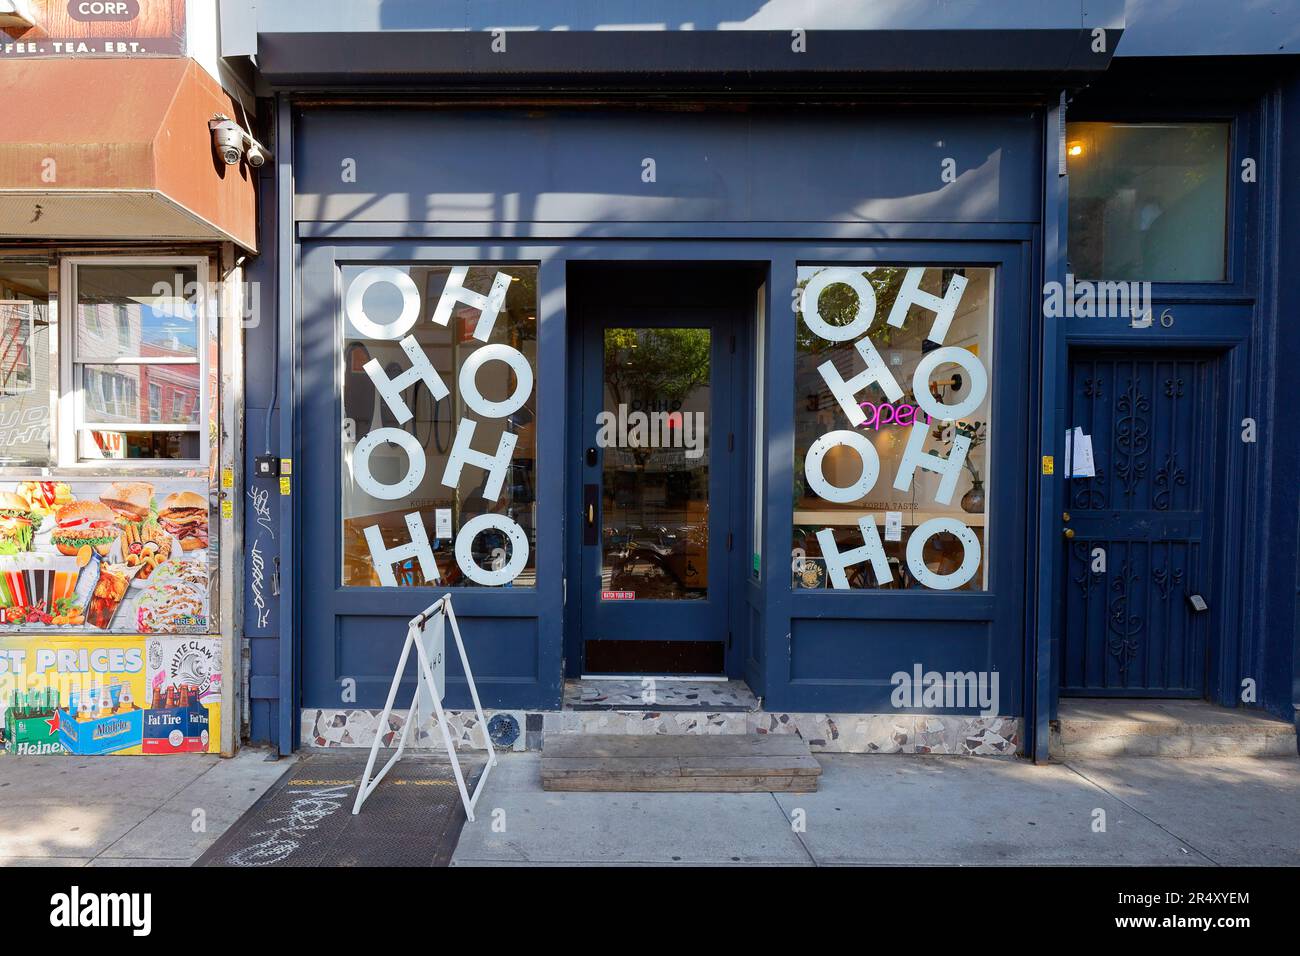 MS. OHHO, 146 Nassau Ave, Brooklyn, NYC storefront photo of a Korean restaurant in the Greenpoint neighborhood, New York. Stock Photo